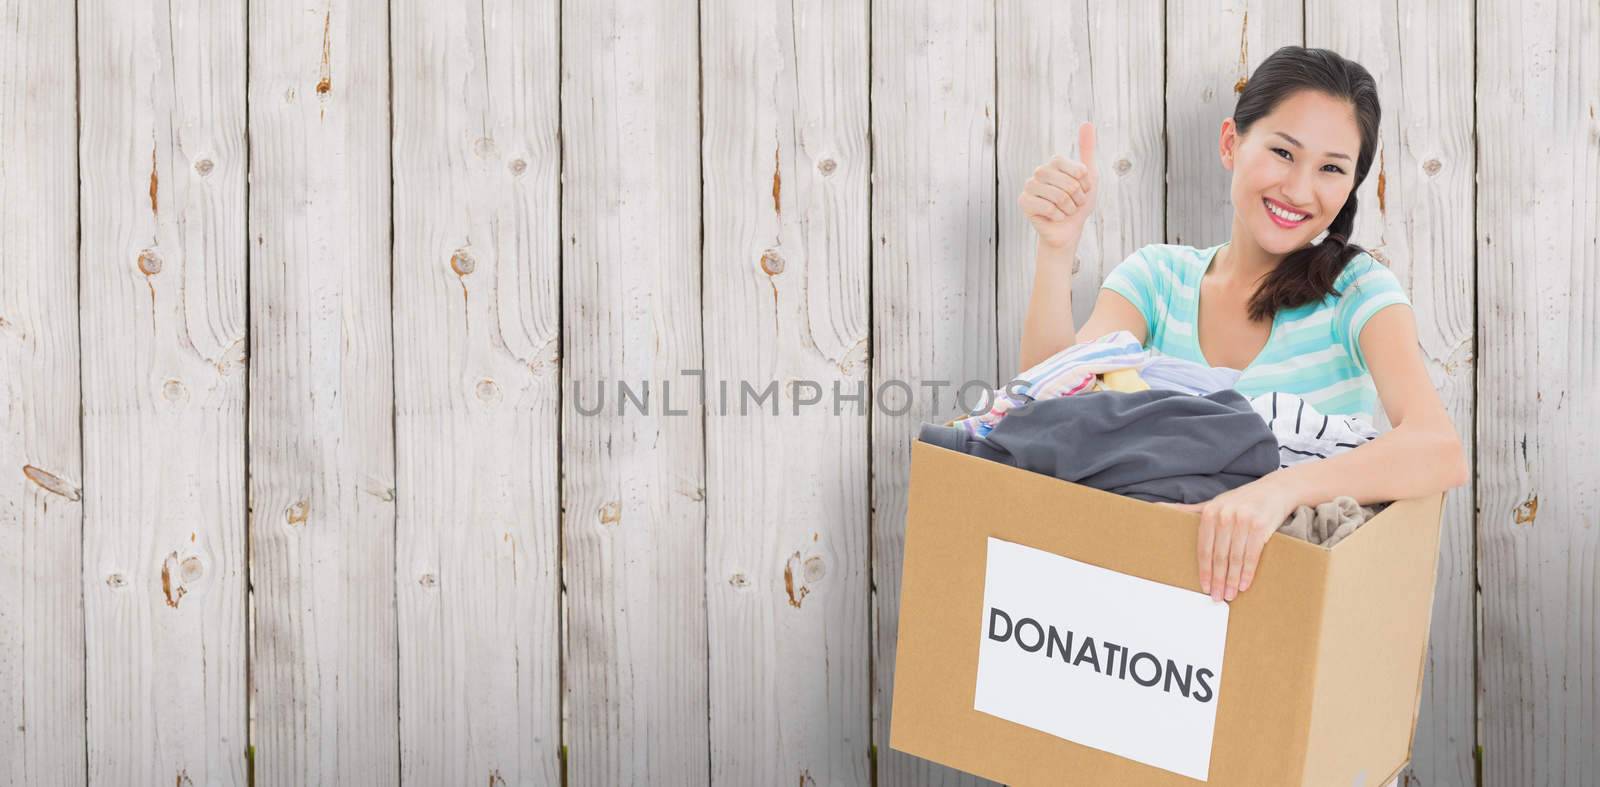 Woman with clothes donation gesturing thumbs up against wooden background